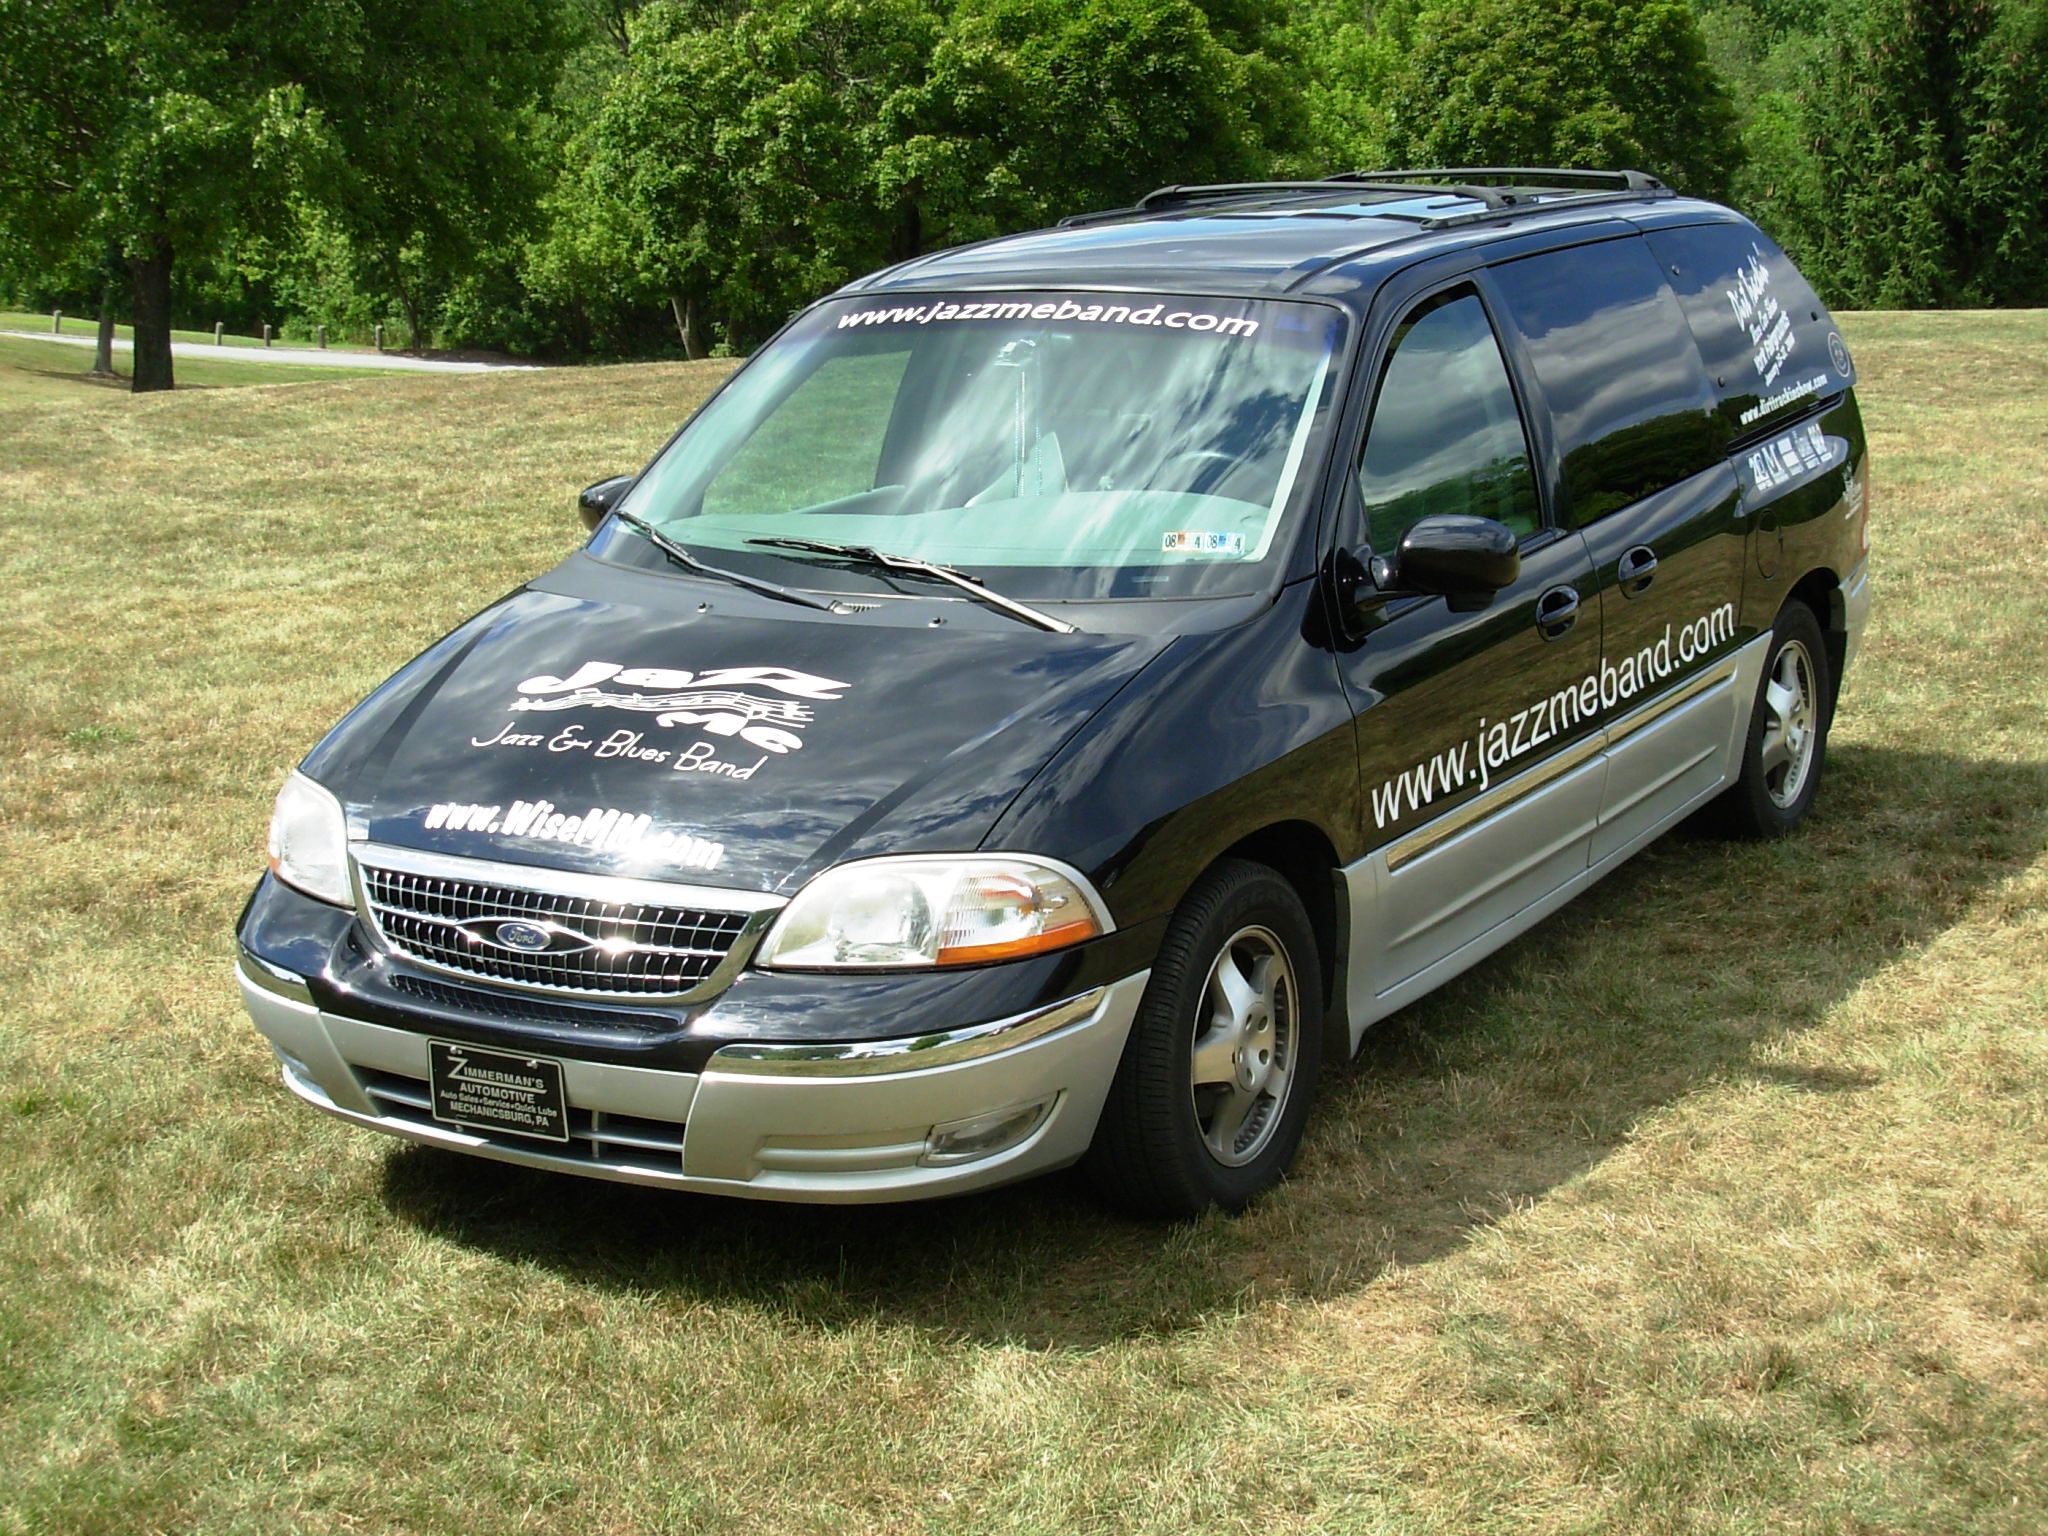 The Jazz Me Mobile Winstar...
Notice the logos...Jazz Me, Wise Motorsport Marketing, WHP-TV 21, Farnham's Insurance, The Coliseum, and Members 1st..our corporate sponsors...
plus Zimmerman's Automotive, the Dirt Trackin' Show, the York County Racing Club, the Fortress radio, and Harley Davidson 
